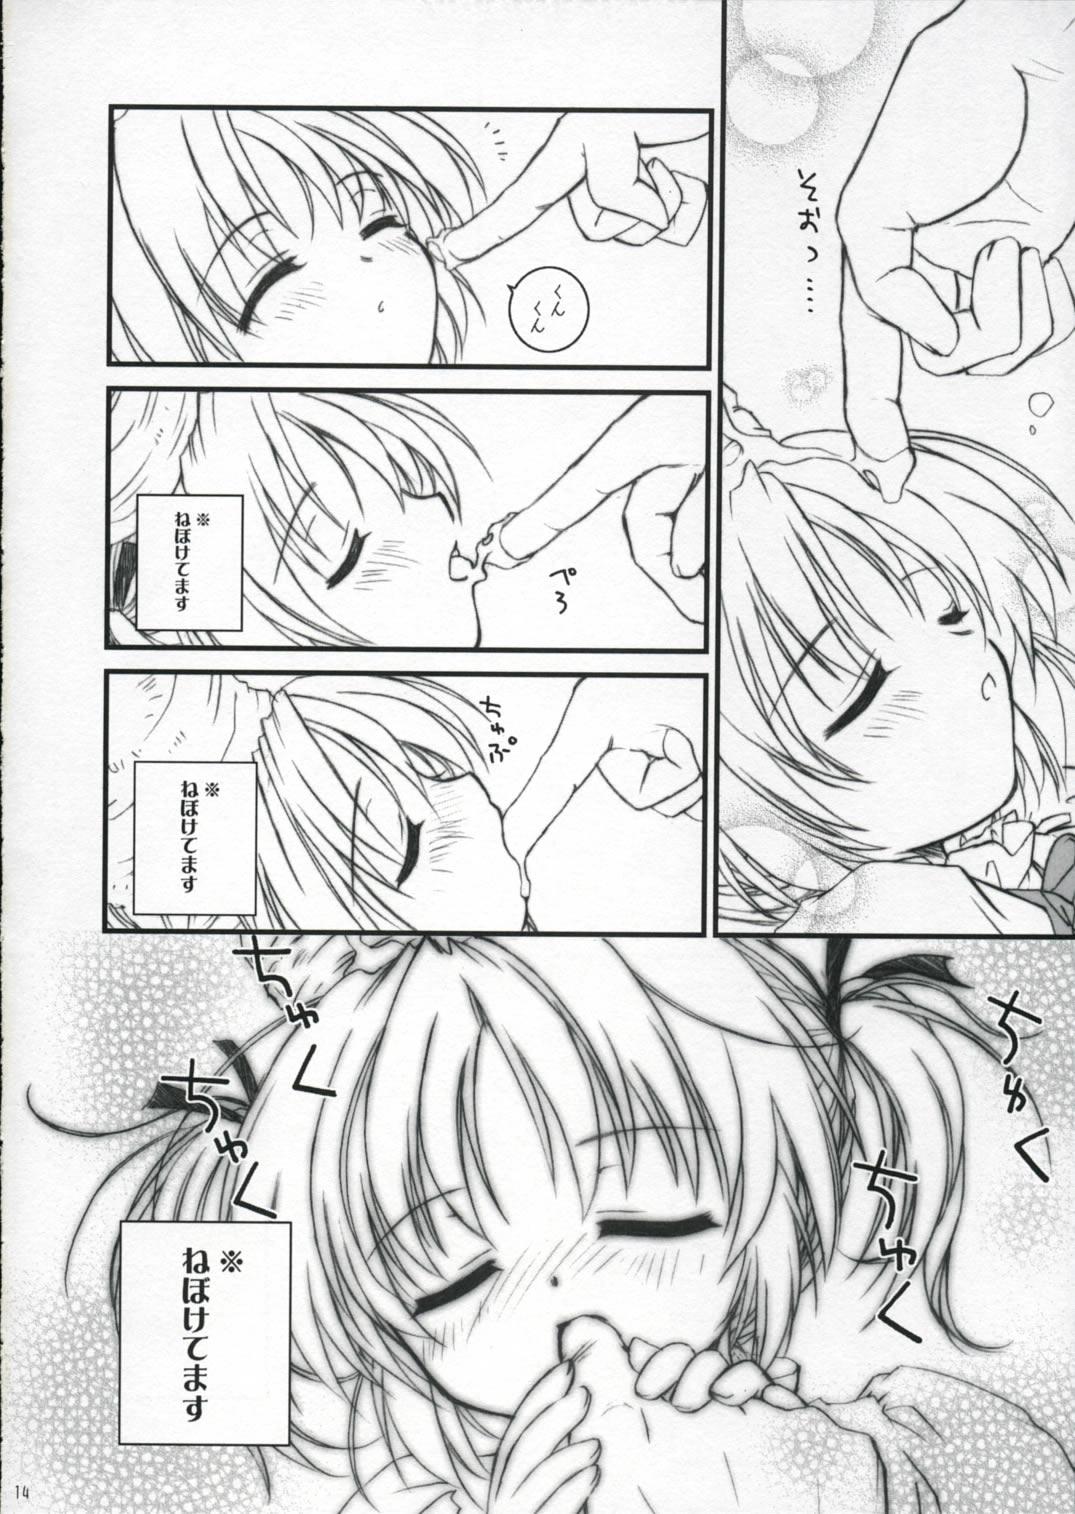 Oil Hachmitsu Biscuit 2-kome Soapy Massage - Page 13